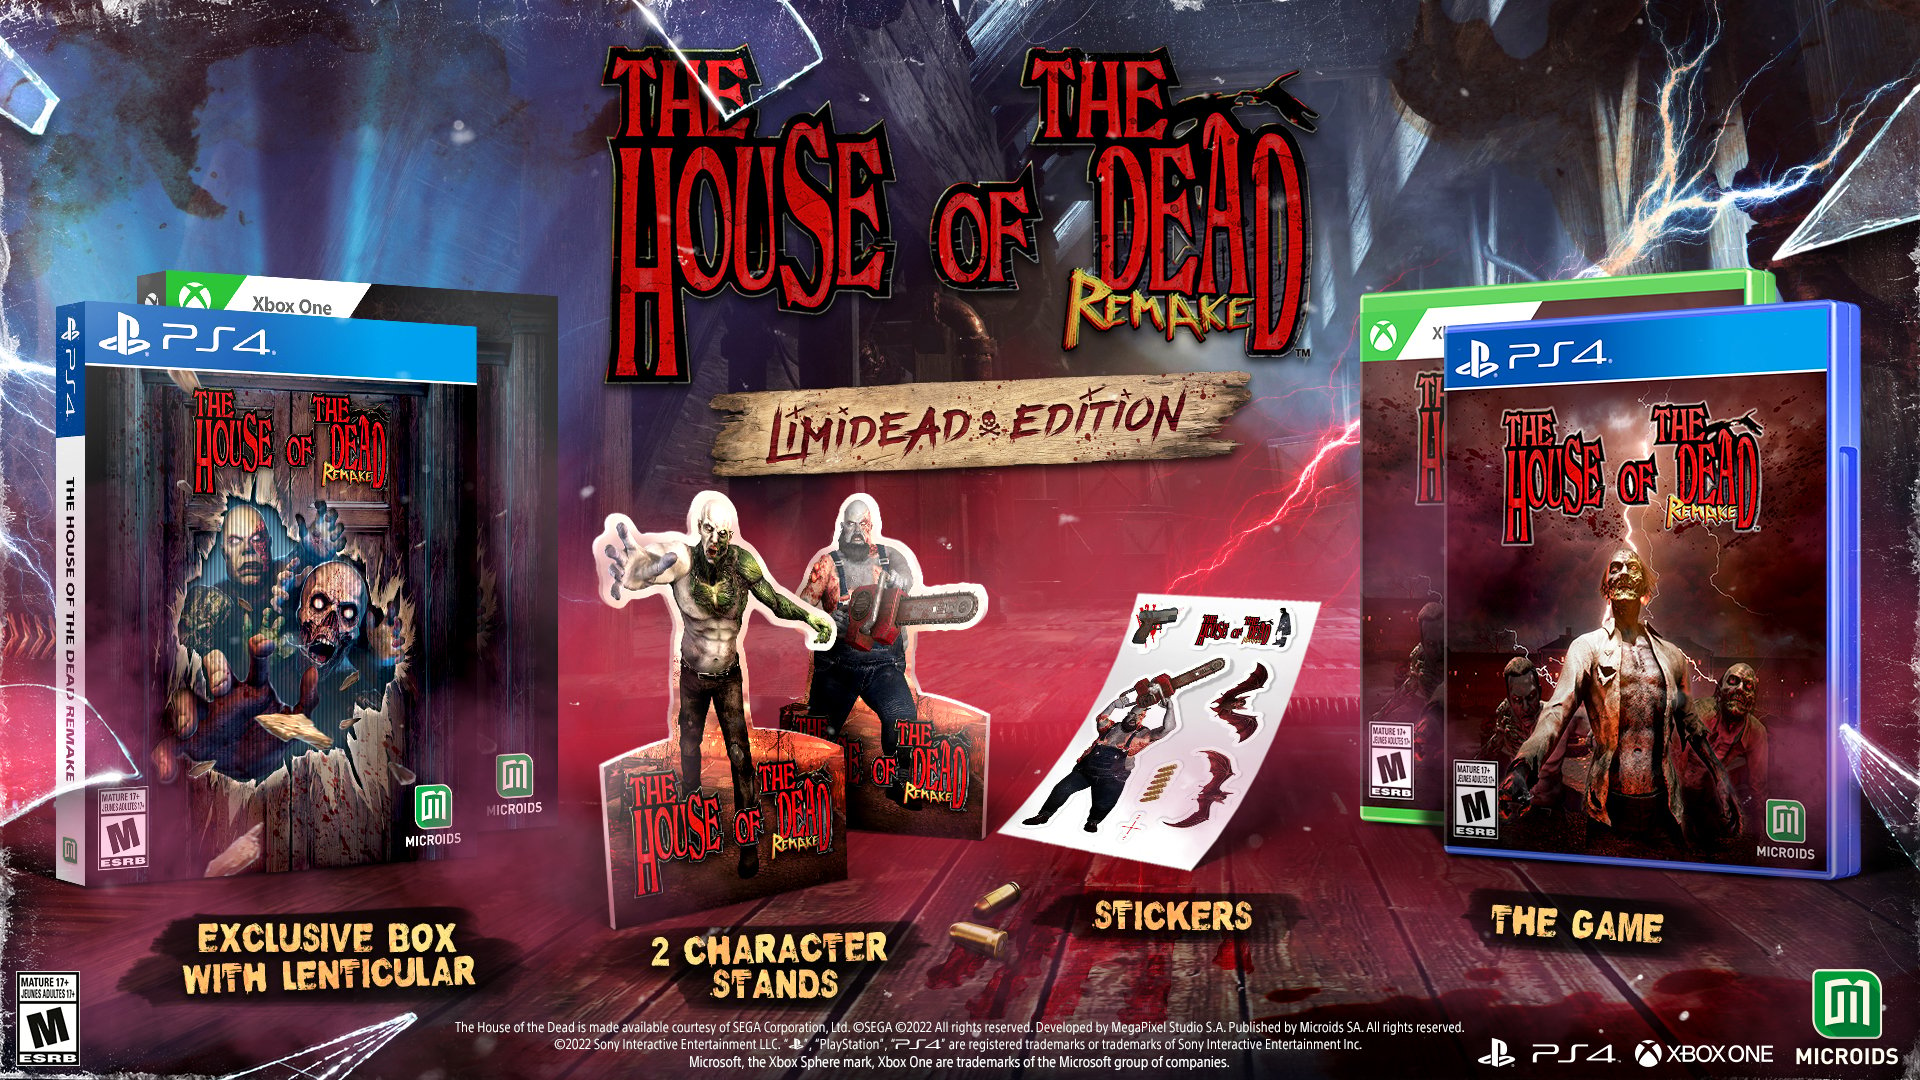 The of the Dead: Remake 'Limidead Edition' coming to Xbox One in 2022 - Gematsu